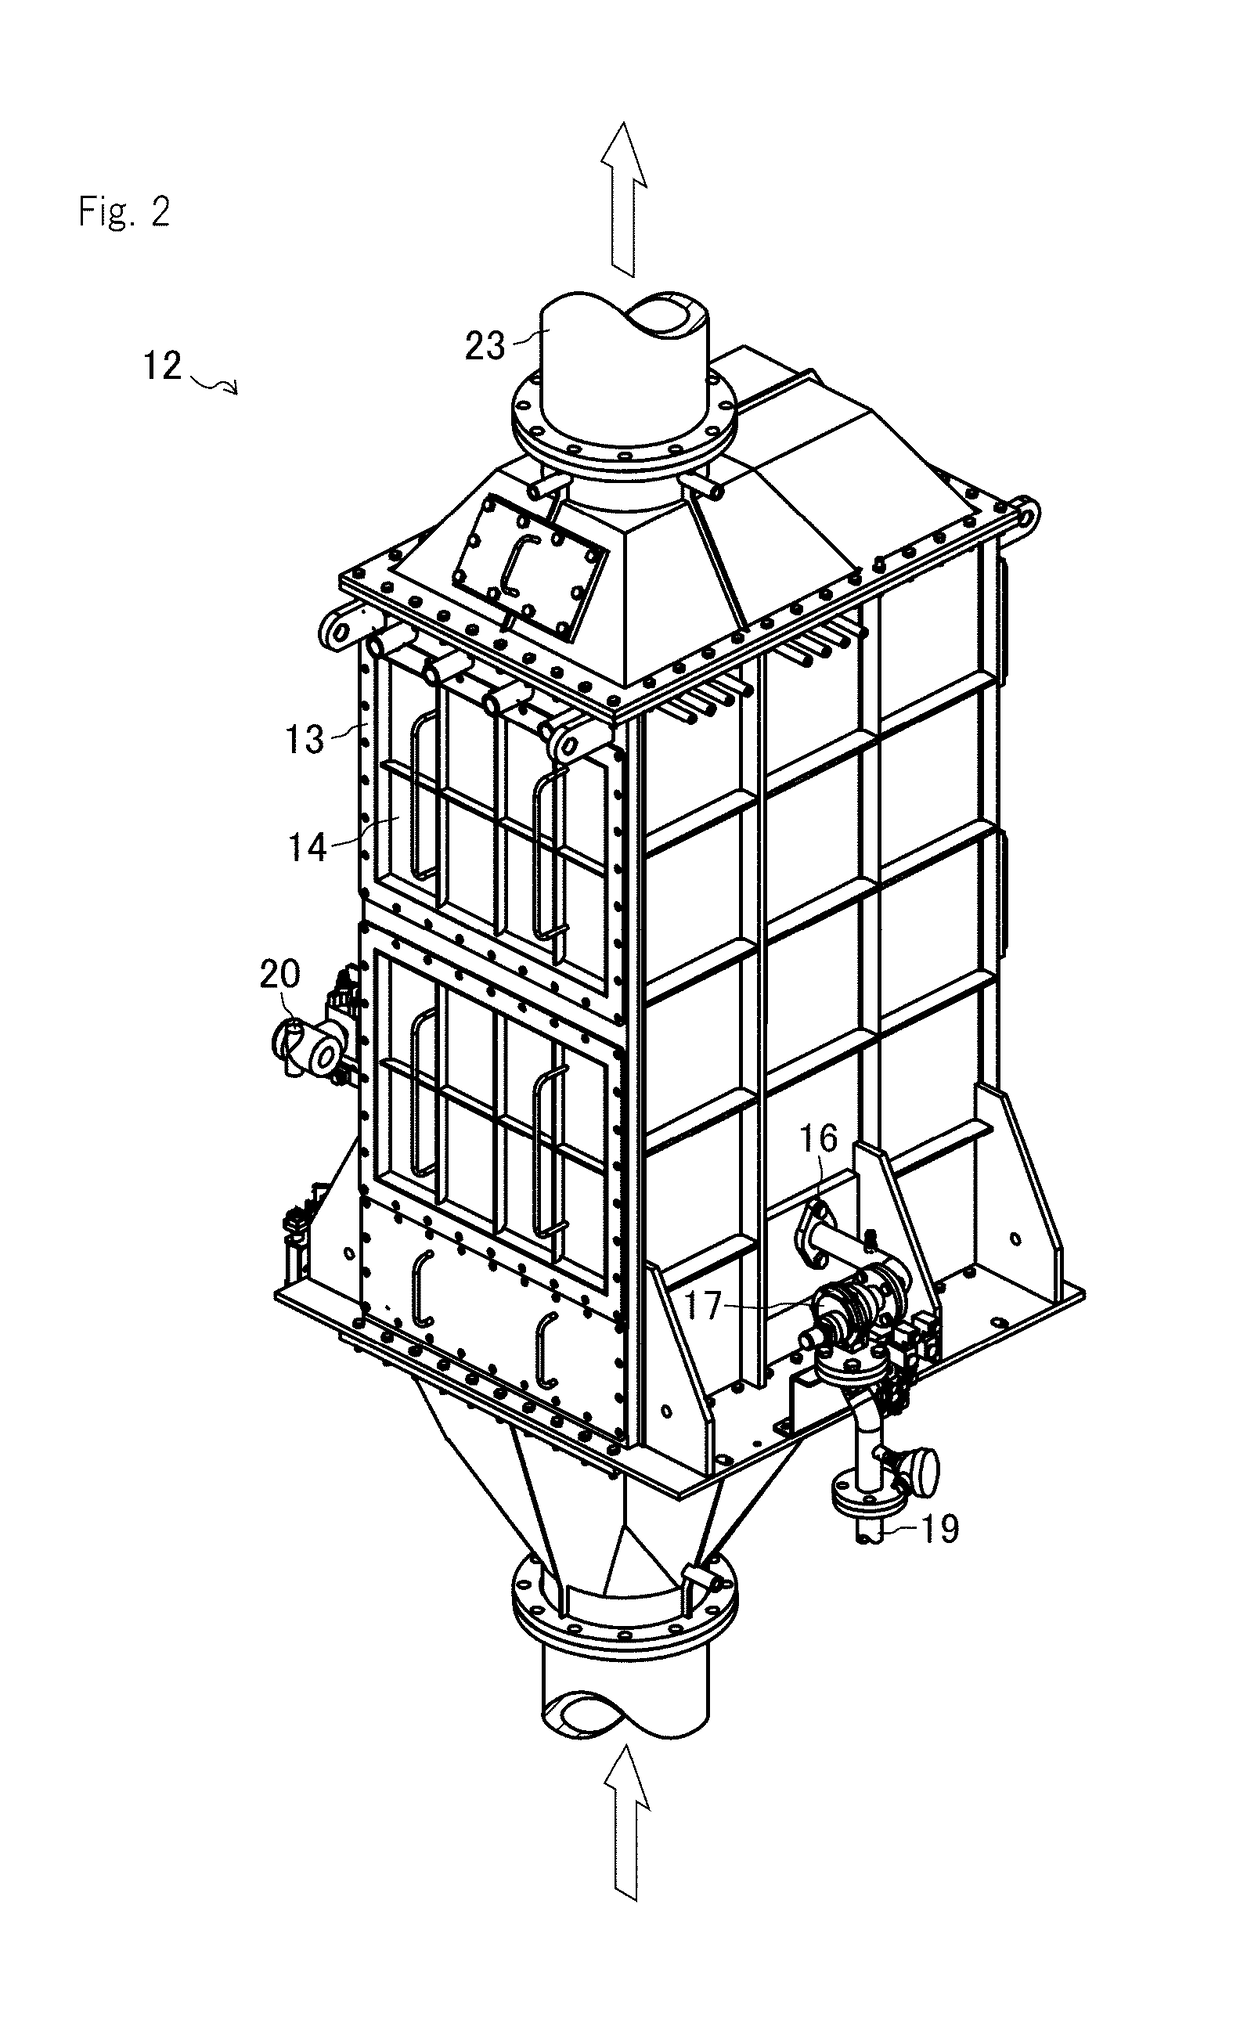 Exhaust purification device